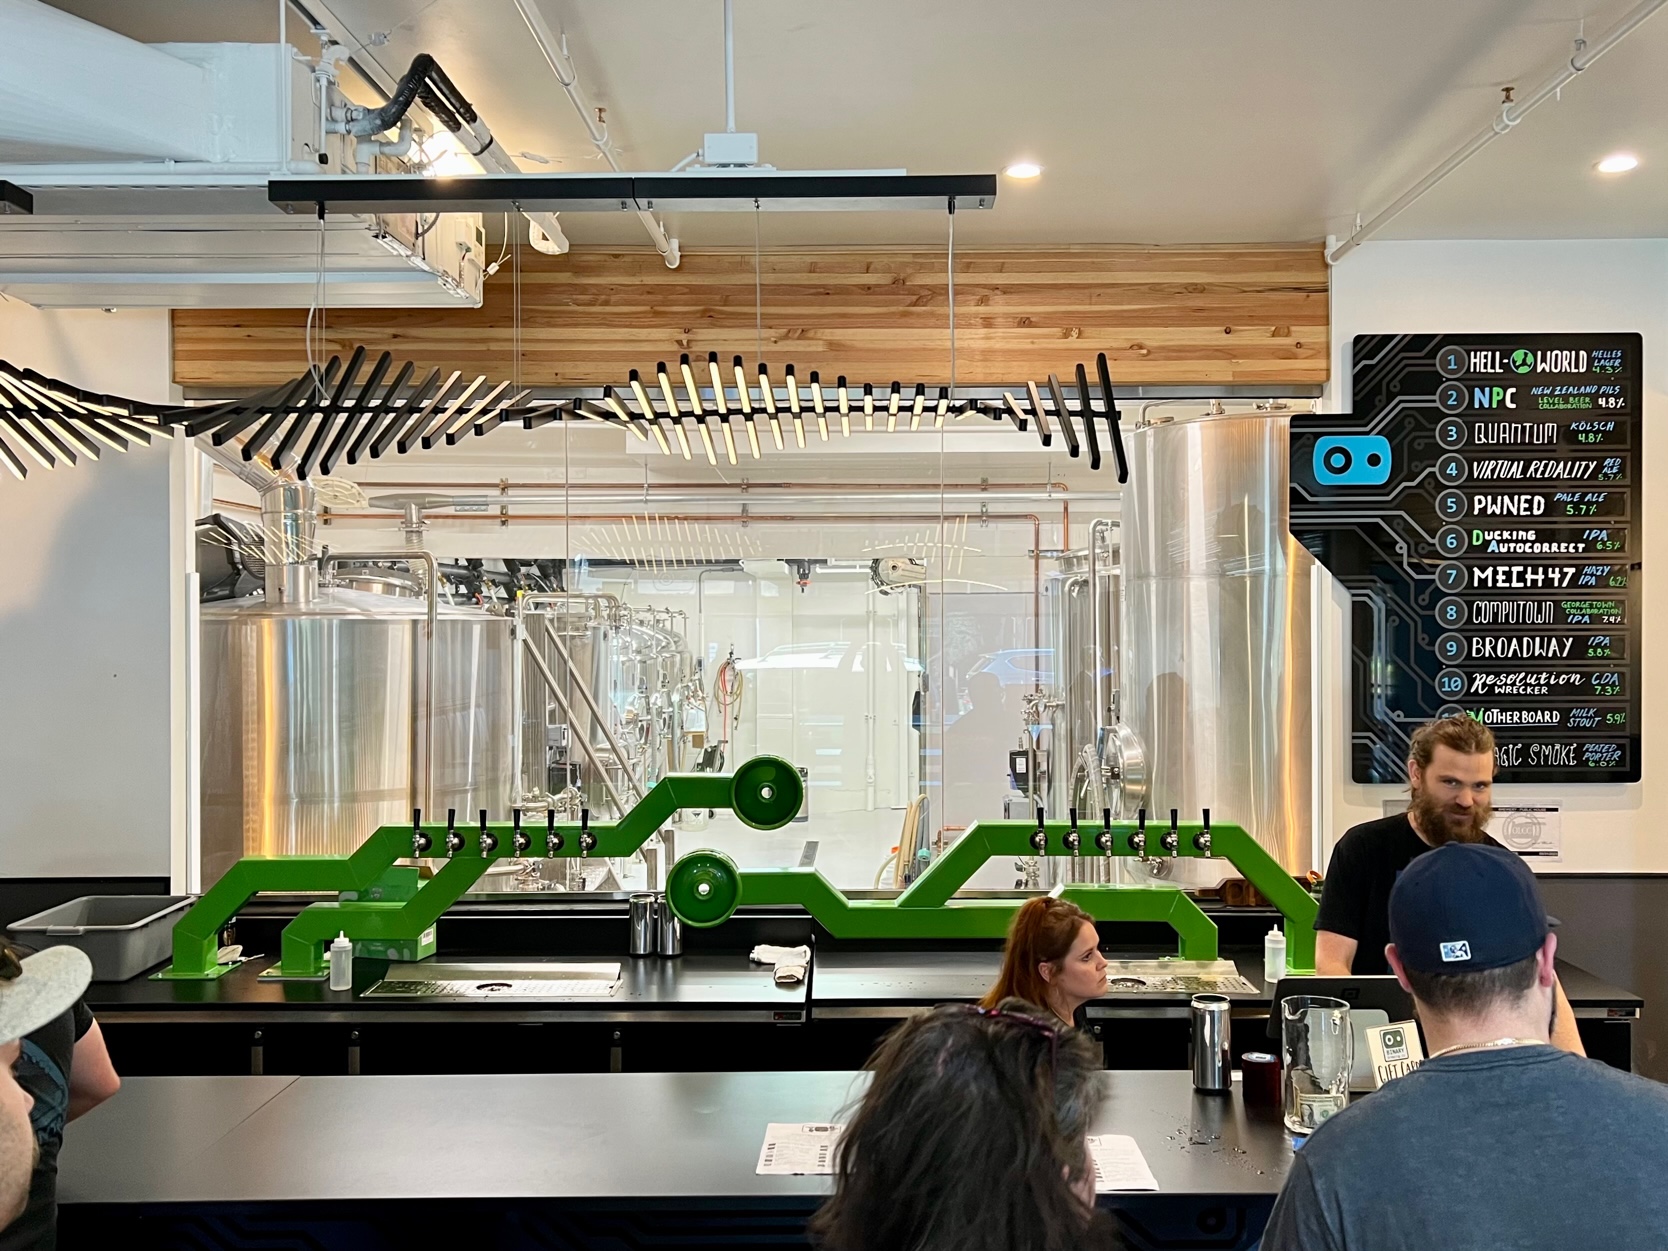 Behind the bar at Binary Brewing sits the newly installed 10-barrel brewhouse.